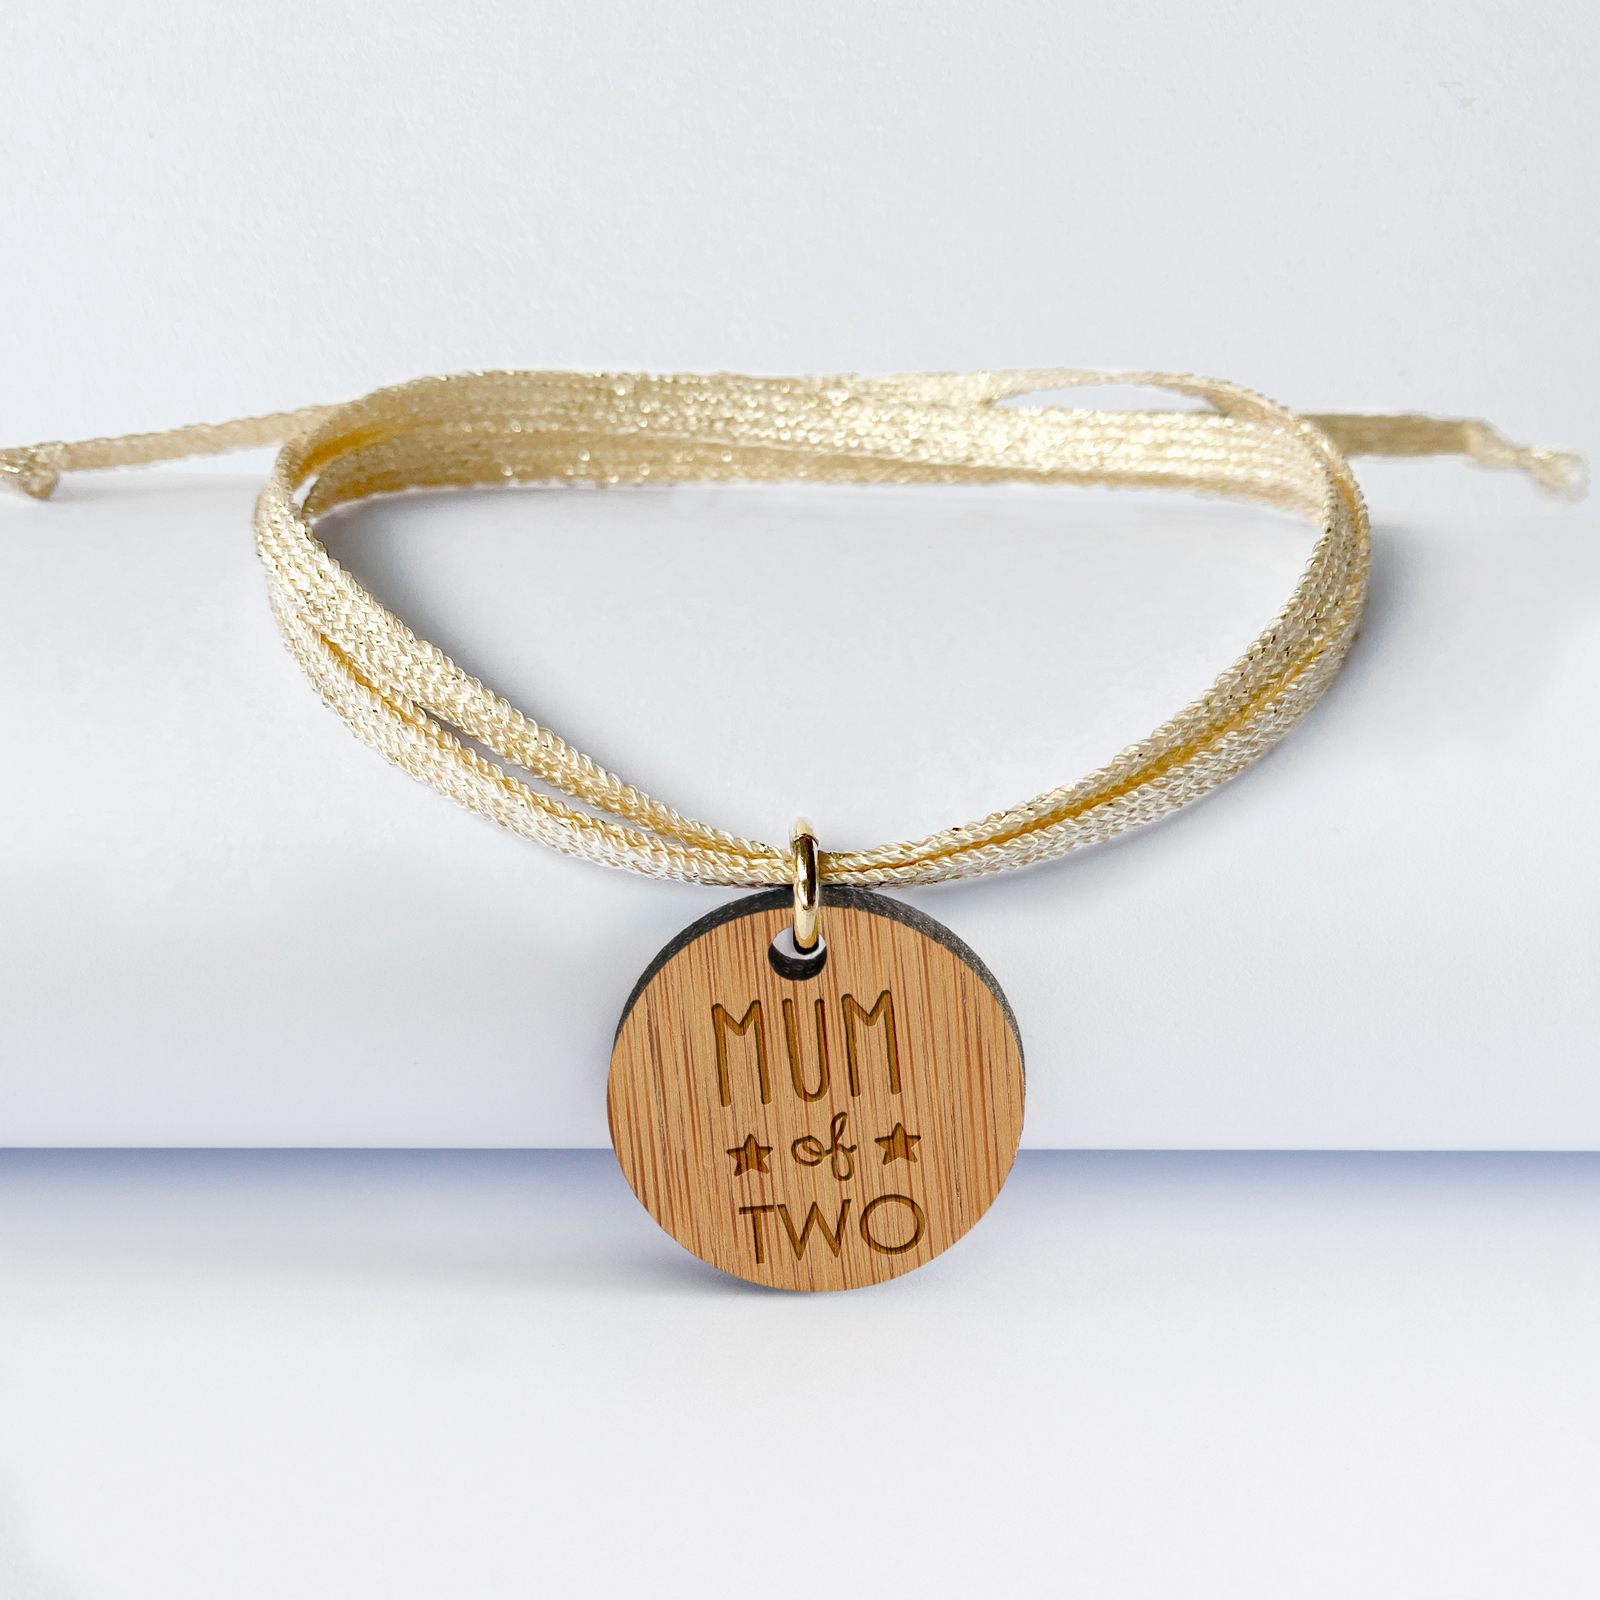 Personalised 3 turn bracelet engraved medal with round sleeper wood 20 mm - special edition "Mum of two"